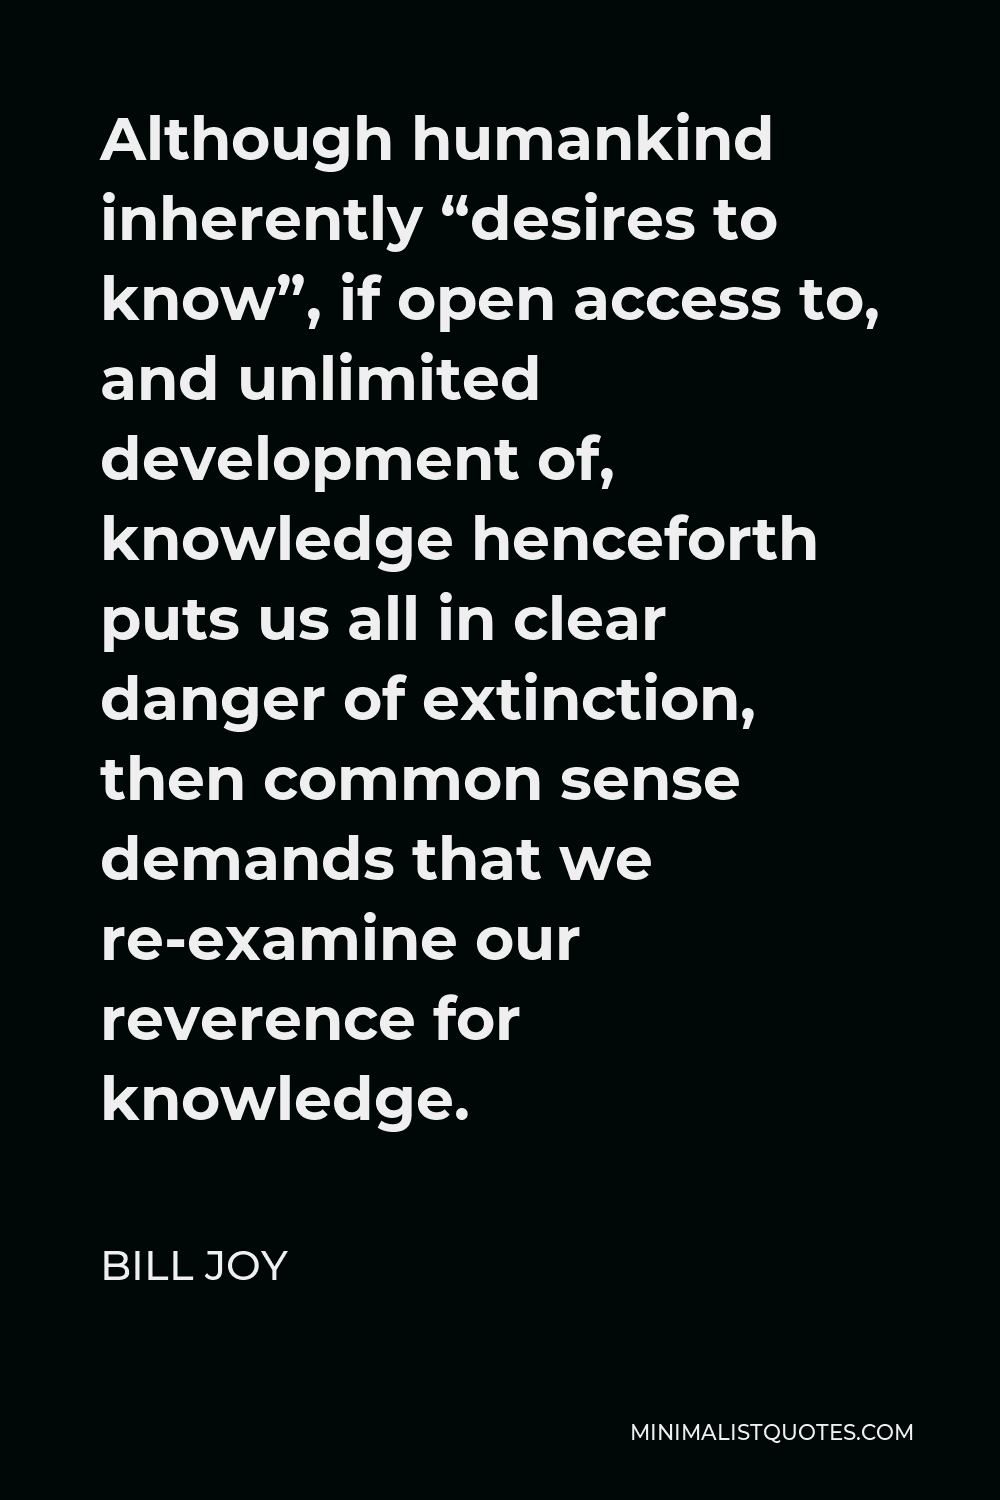 Bill Joy Quote - Although humankind inherently “desires to know”, if open access to, and unlimited development of, knowledge henceforth puts us all in clear danger of extinction, then common sense demands that we re-examine our reverence for knowledge.